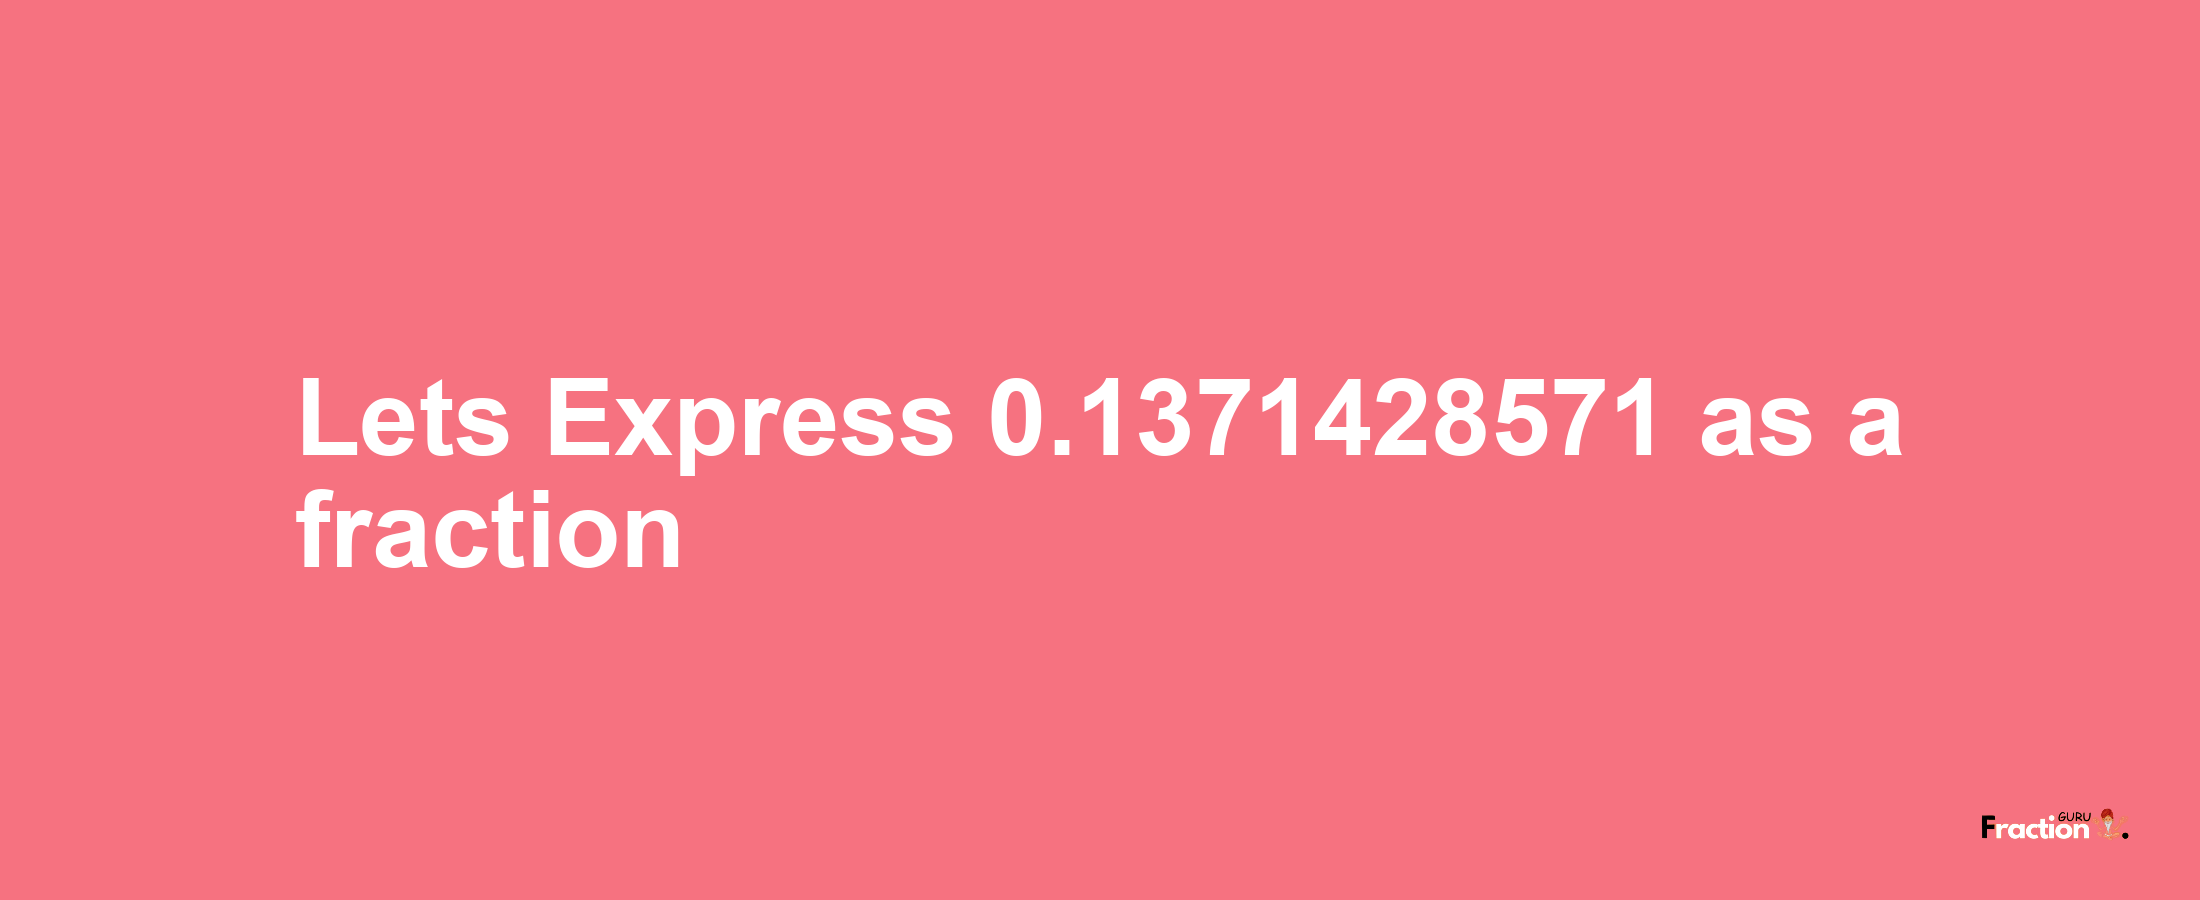 Lets Express 0.1371428571 as afraction